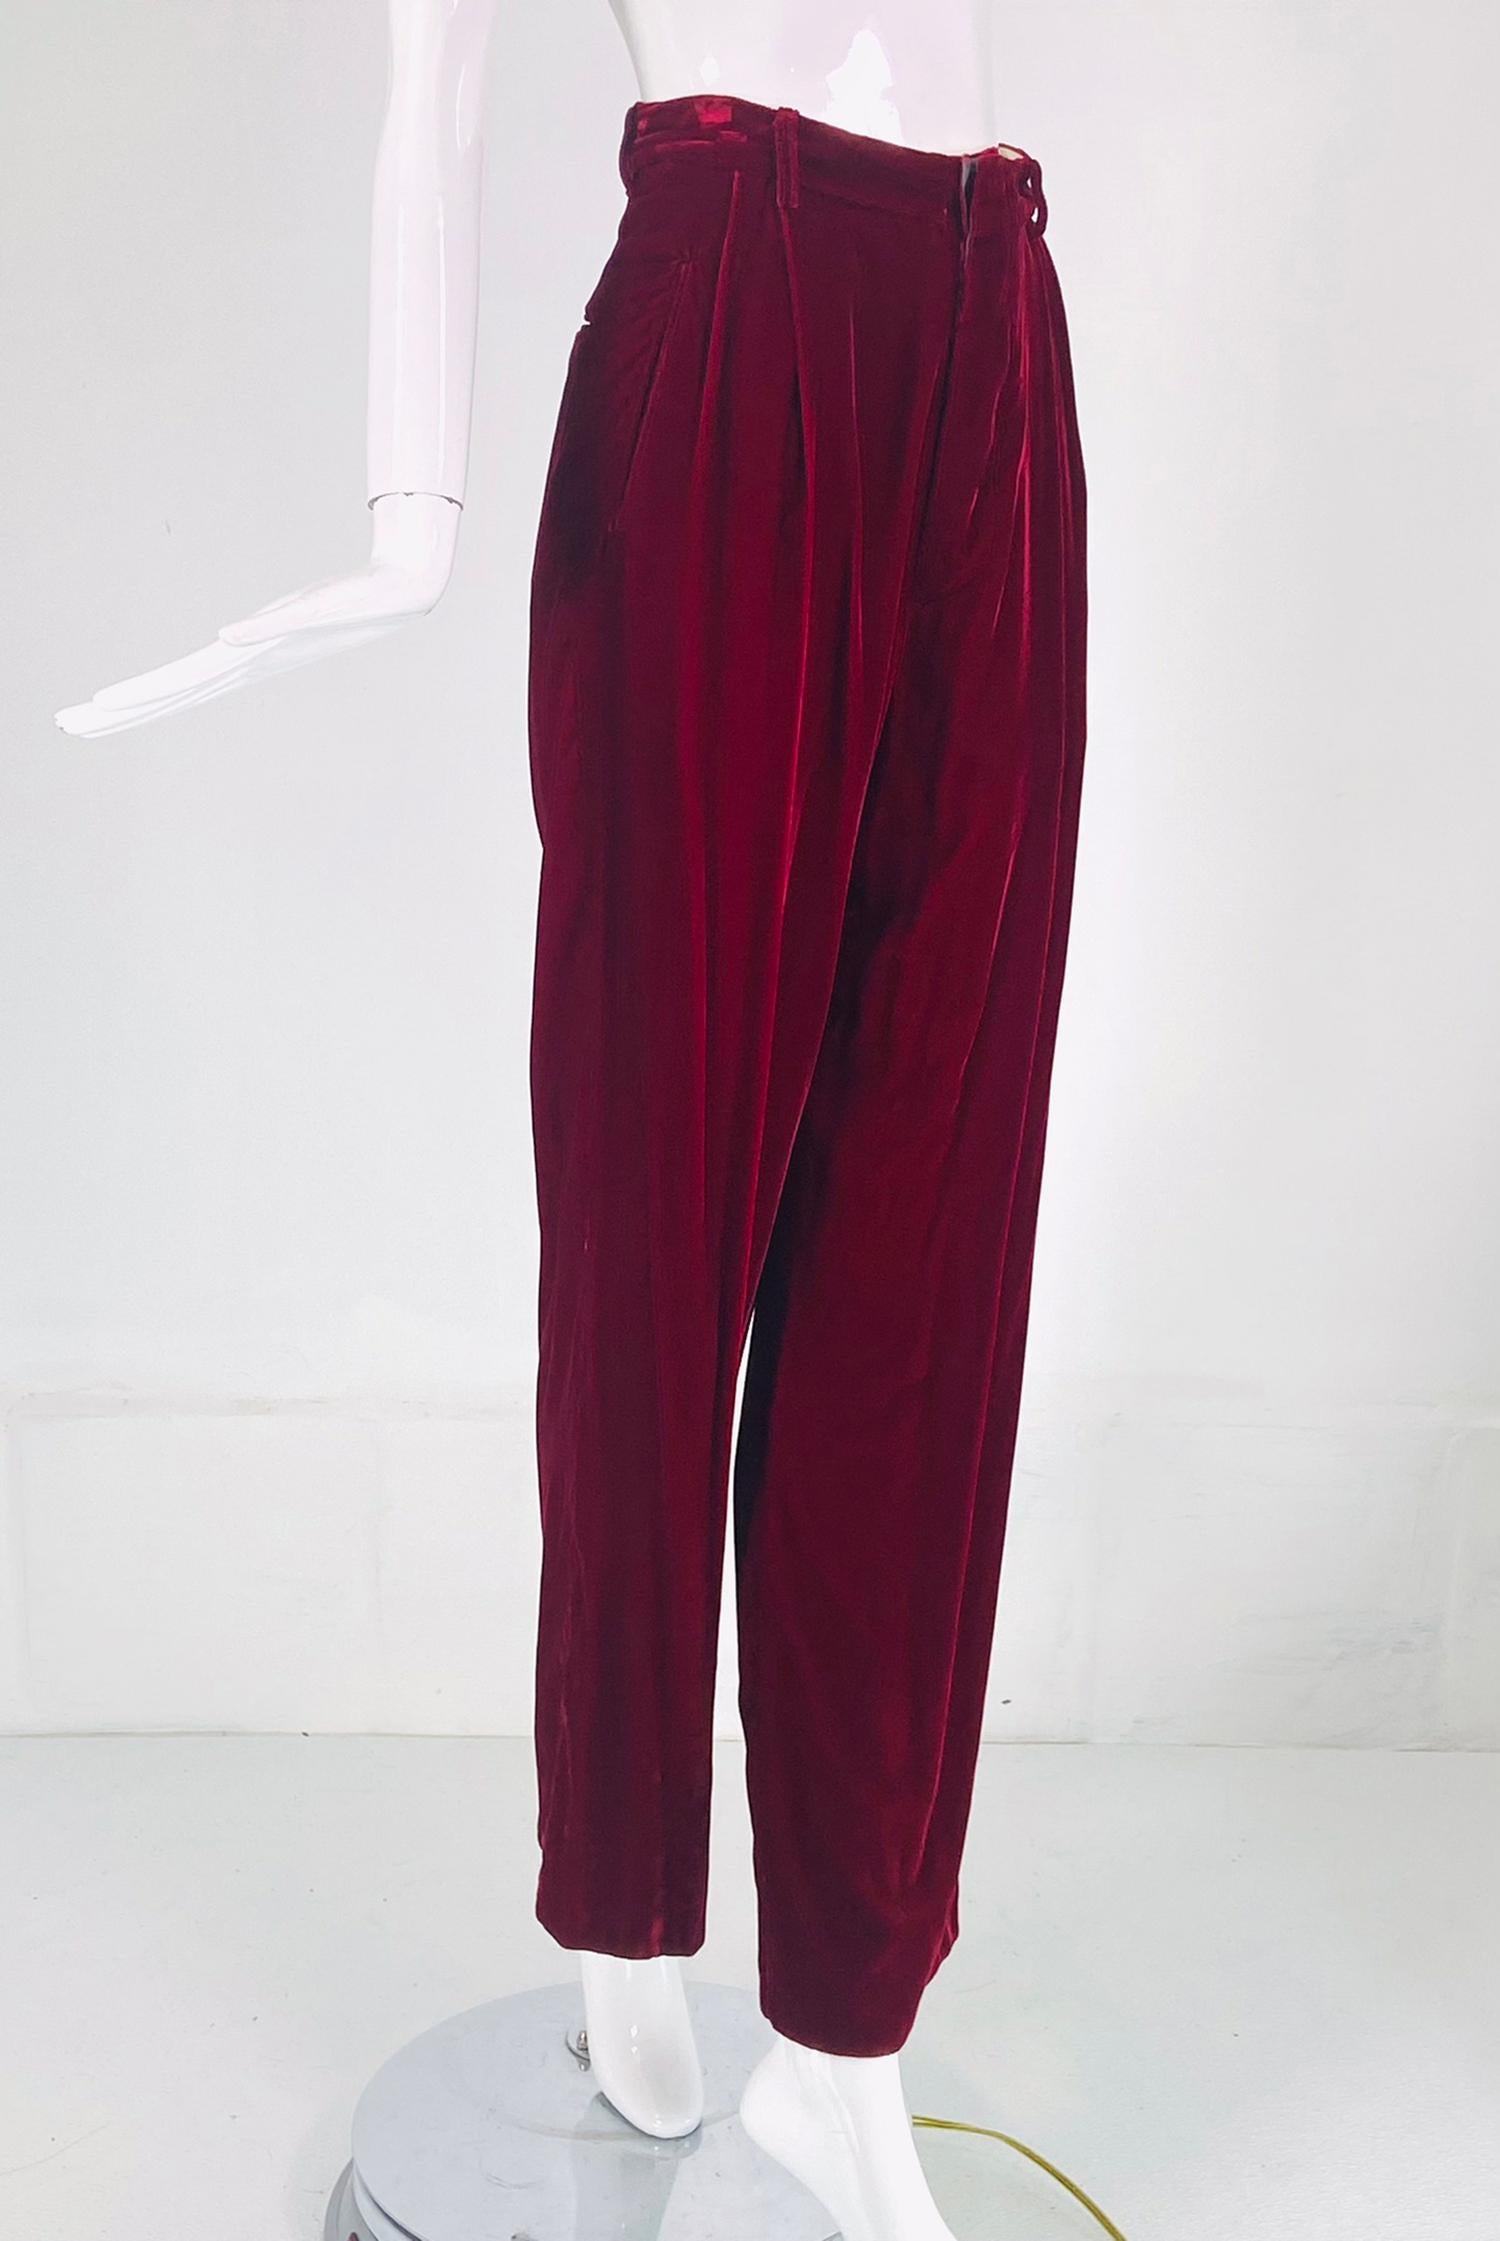 Romeo Gigli S/S 1990 Look 47 RTW womens garnet velvet, man tailored, button fly trouser 40. Beautiful garnet velvet trouser that sits at the natural waist, with pleat fronts, button fly and angled hip side besom pockets. The legs are full and